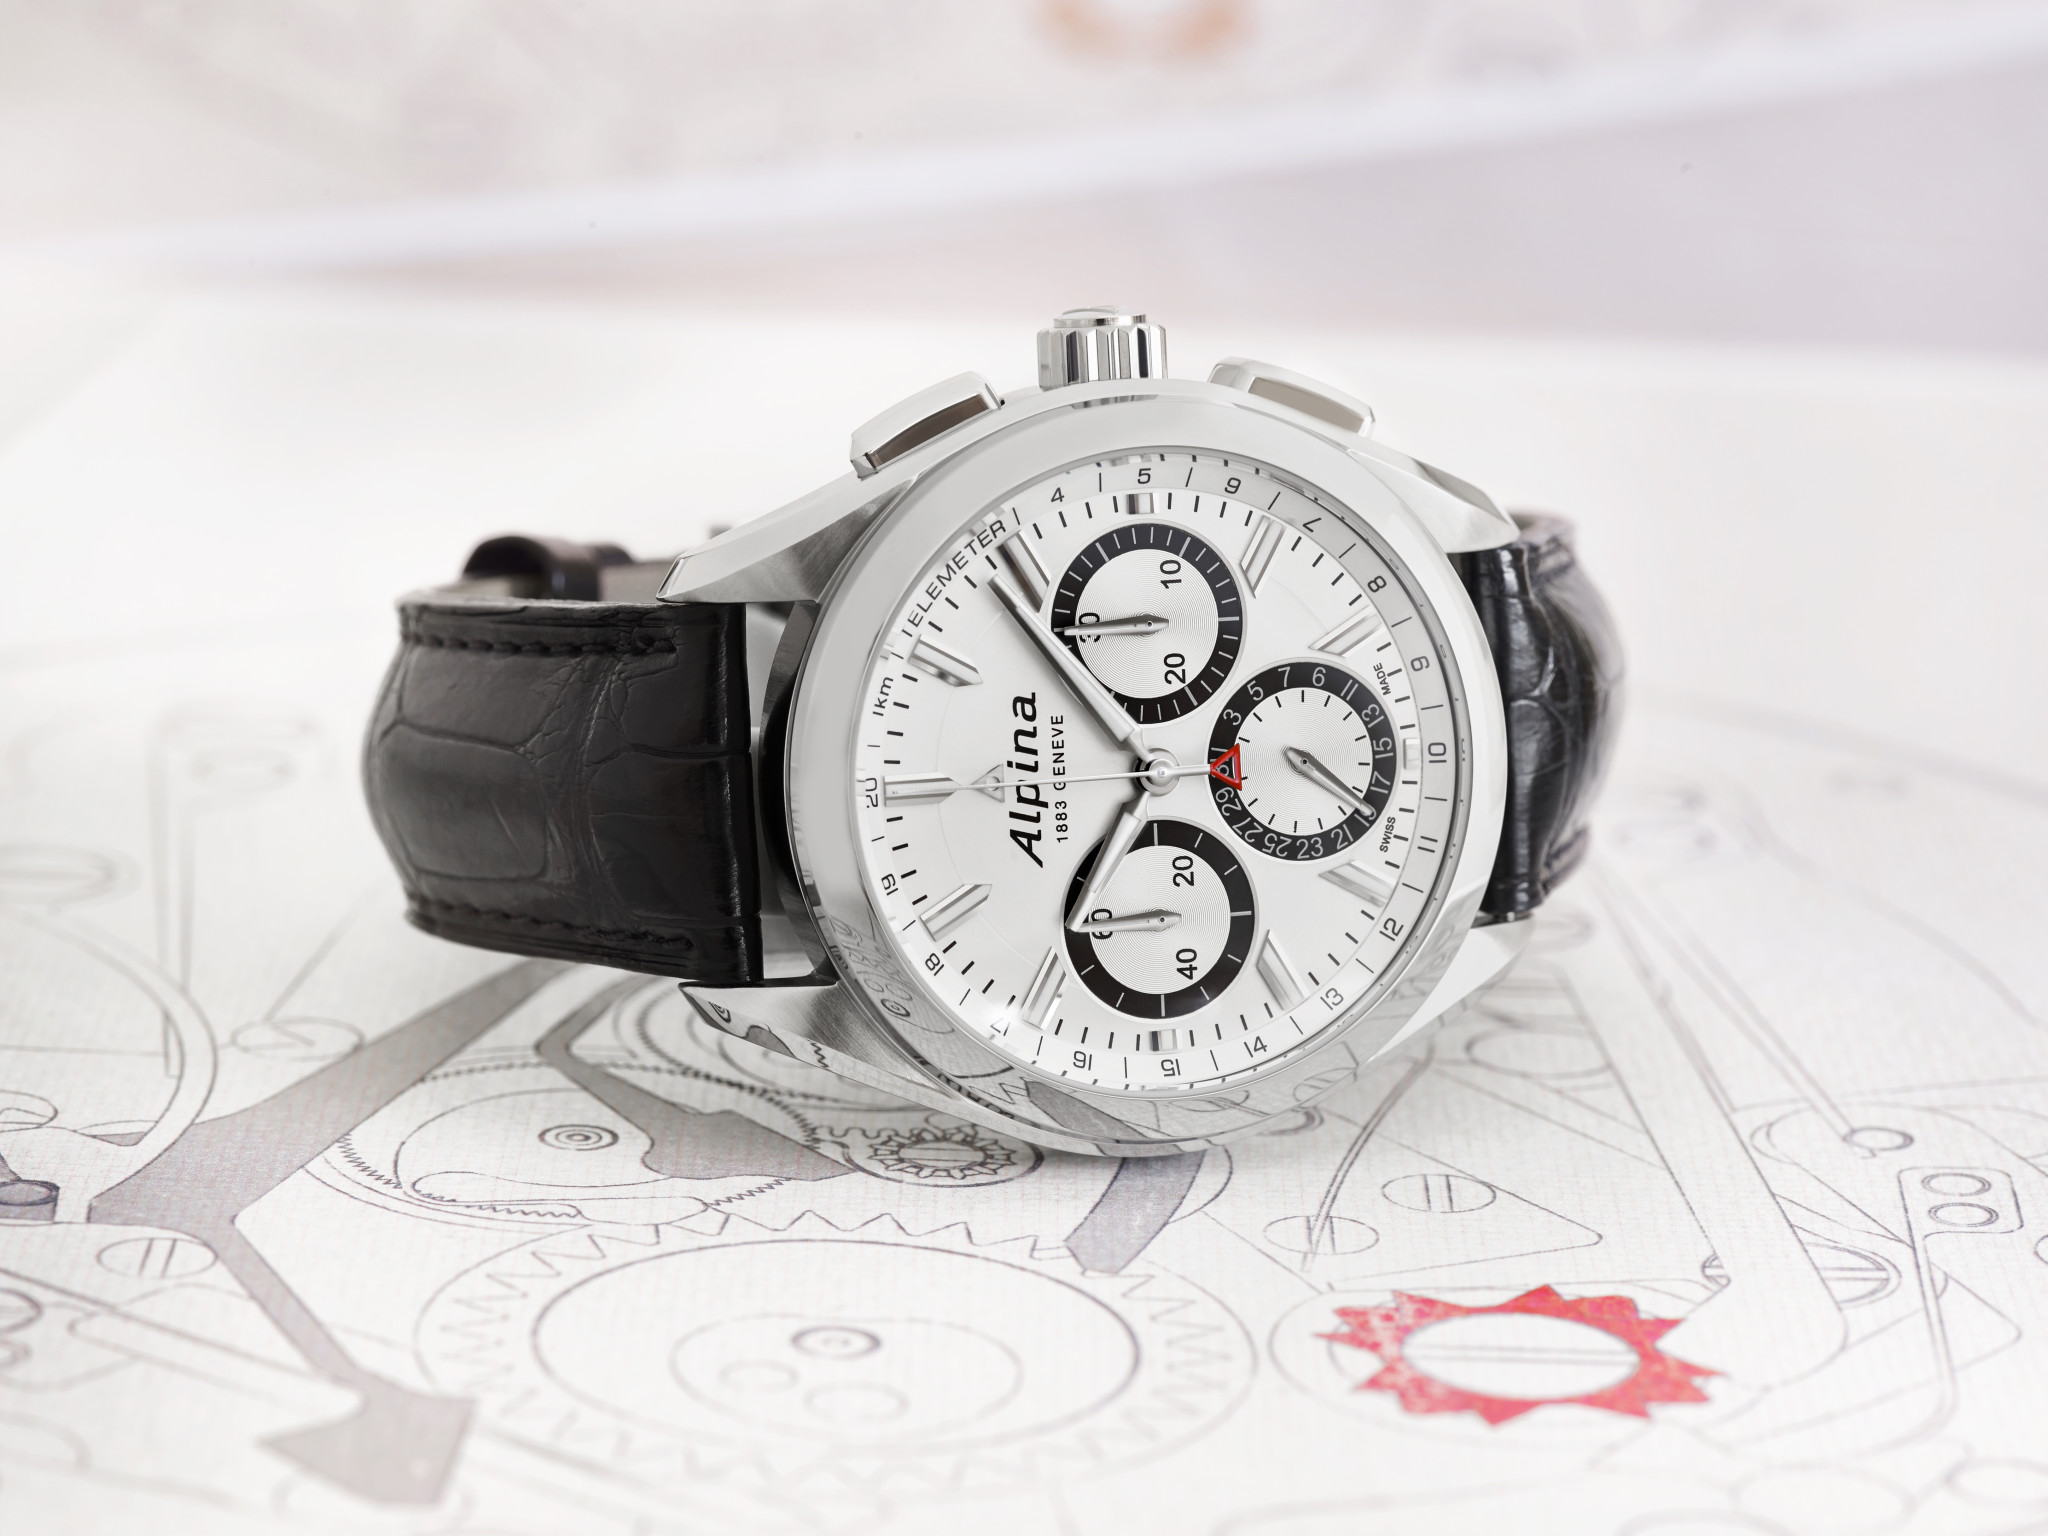 Flyback chronograph